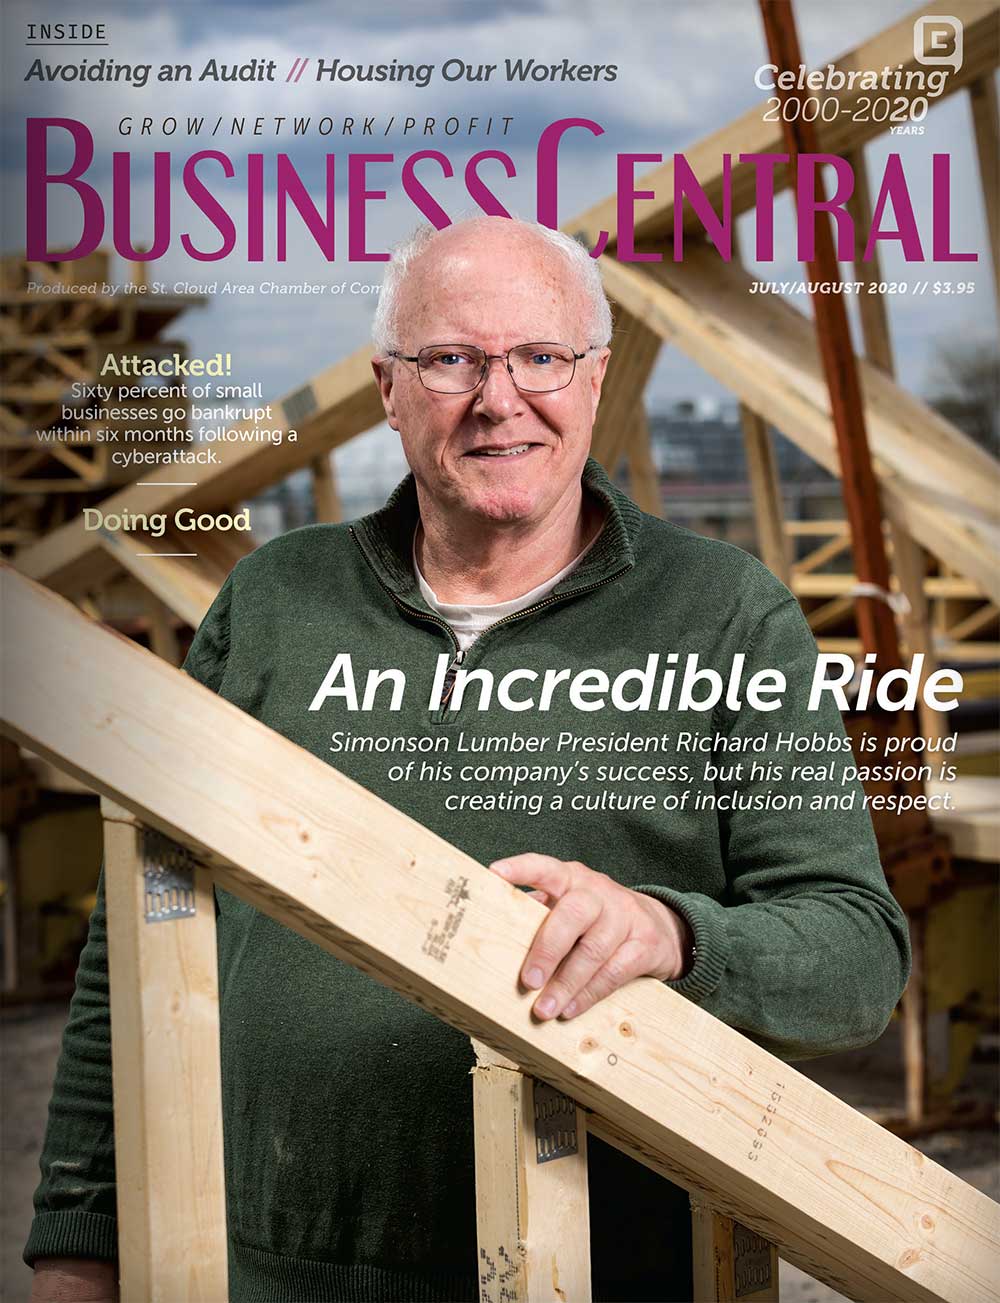 Rich Hobbs featured on the cover of Business Central magazine